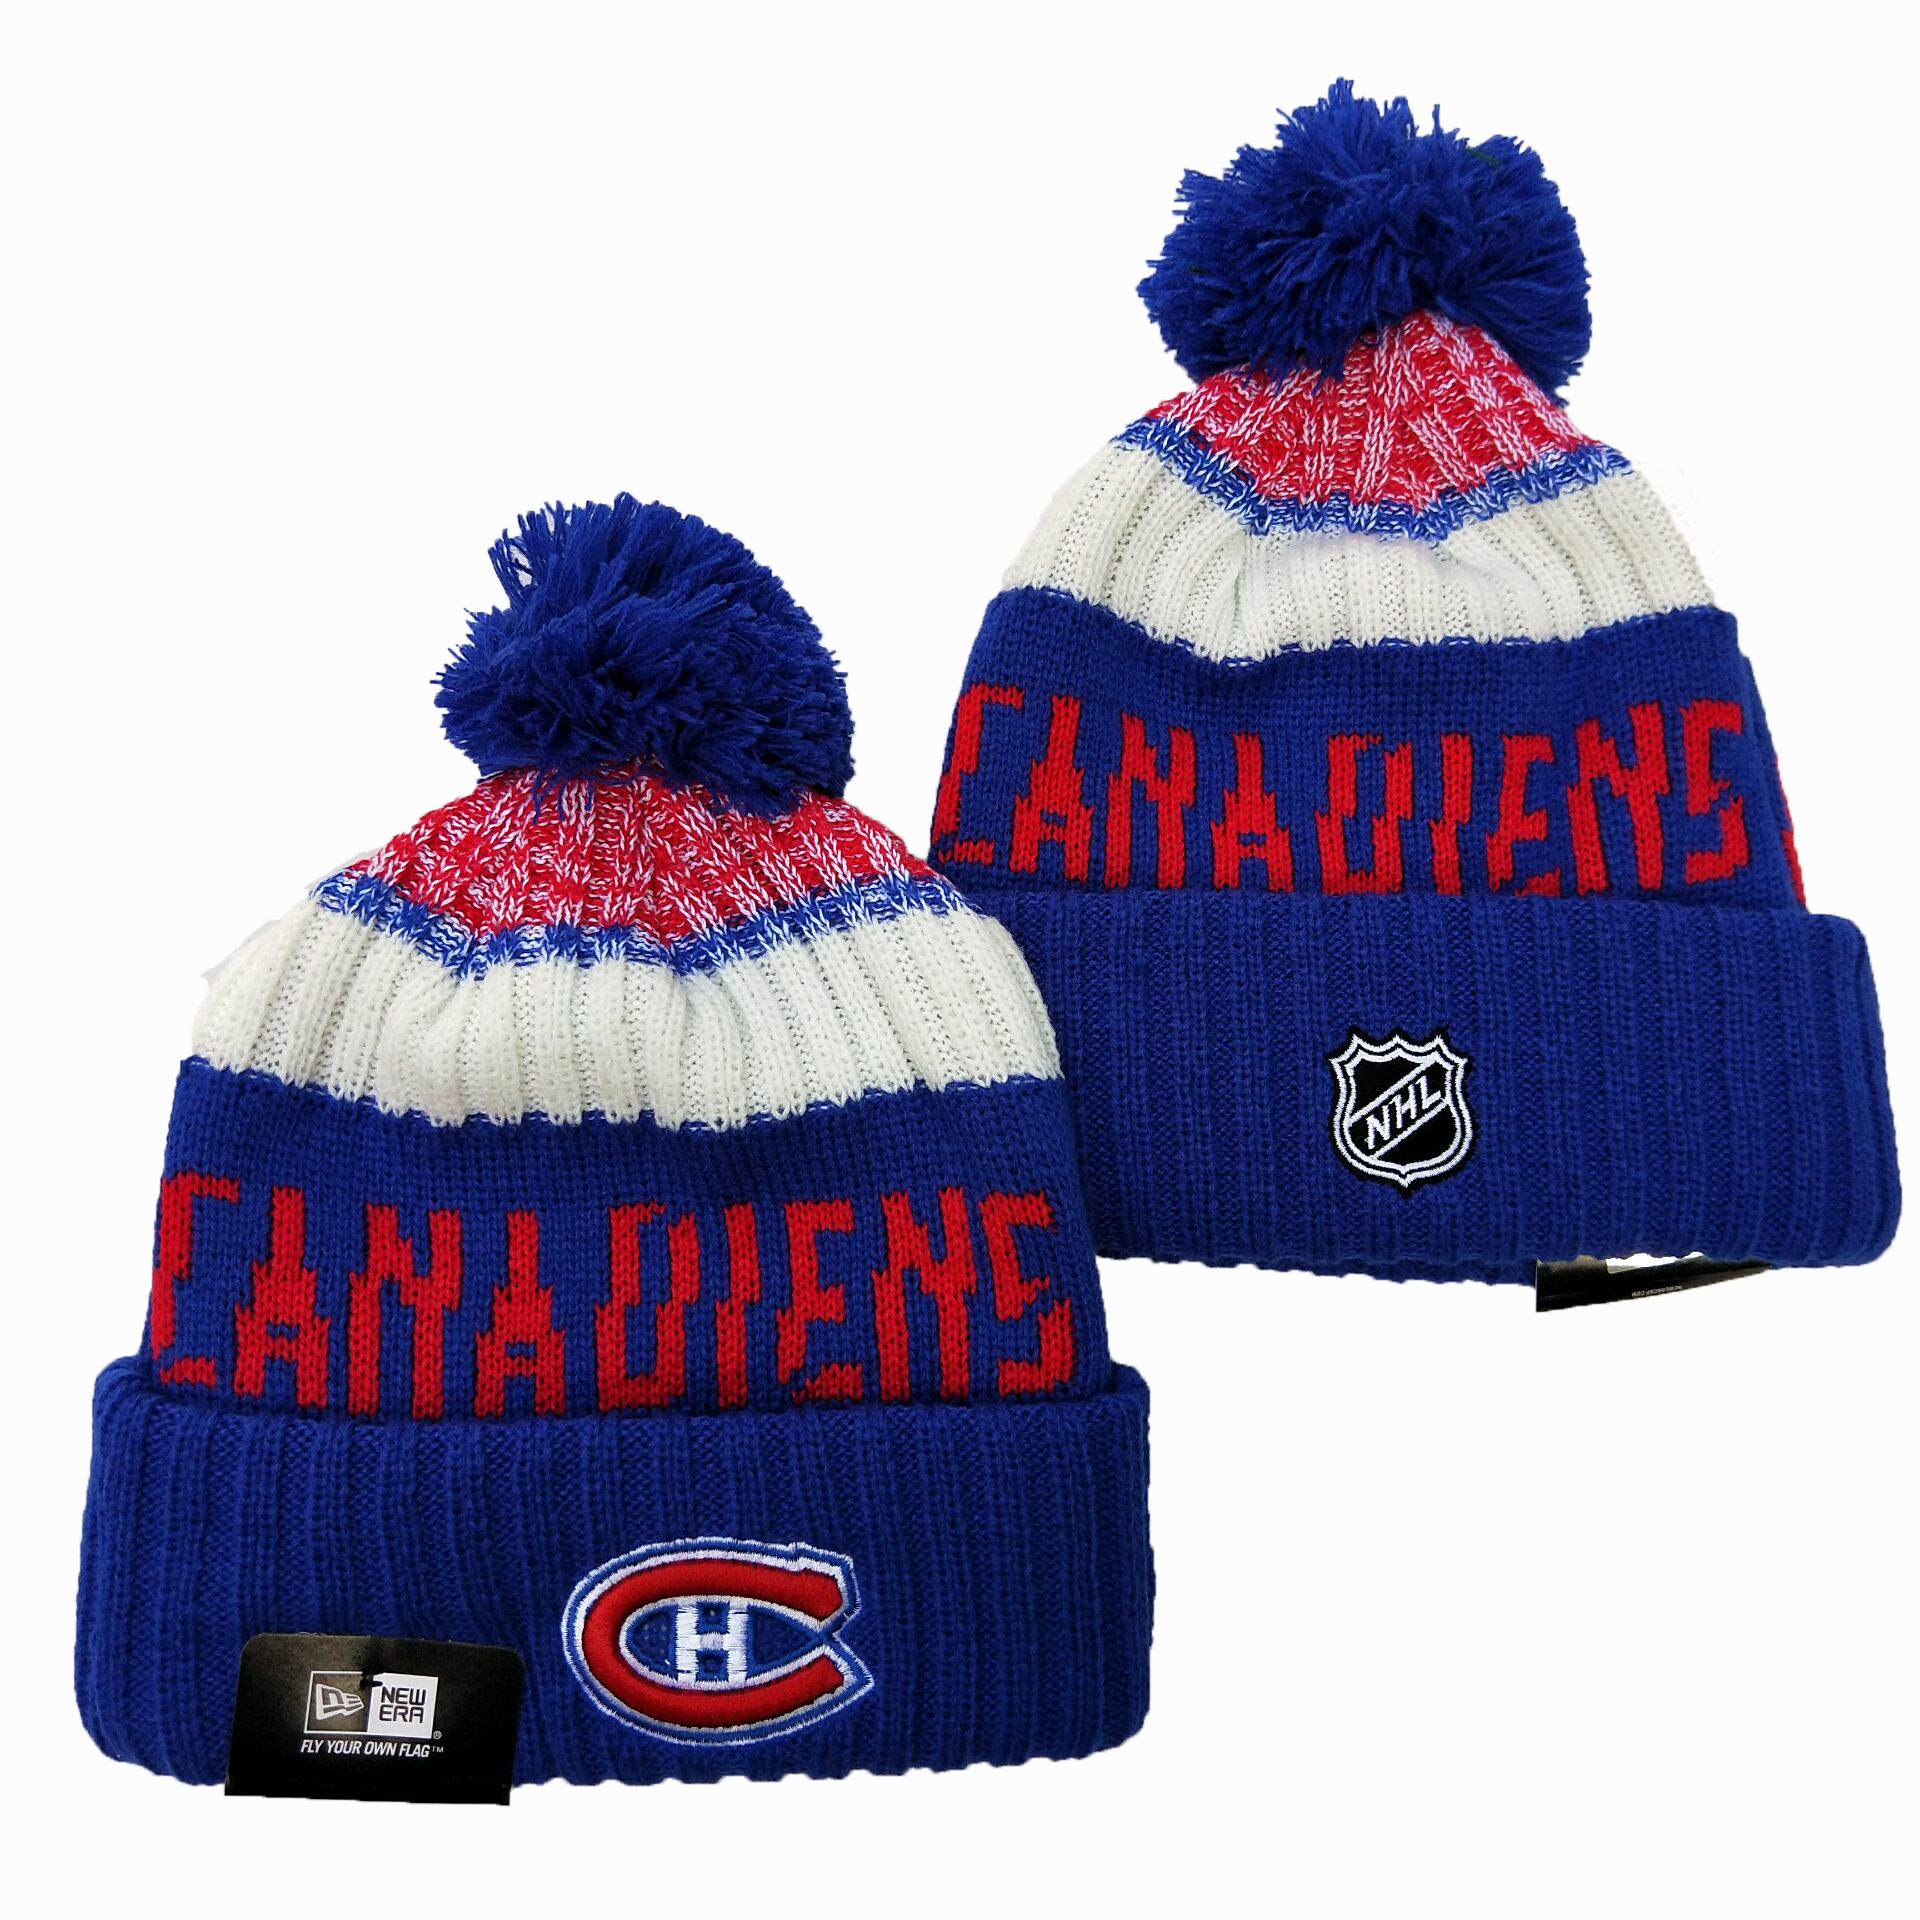 MONTREAL CANADIENS CAPS-YD1506